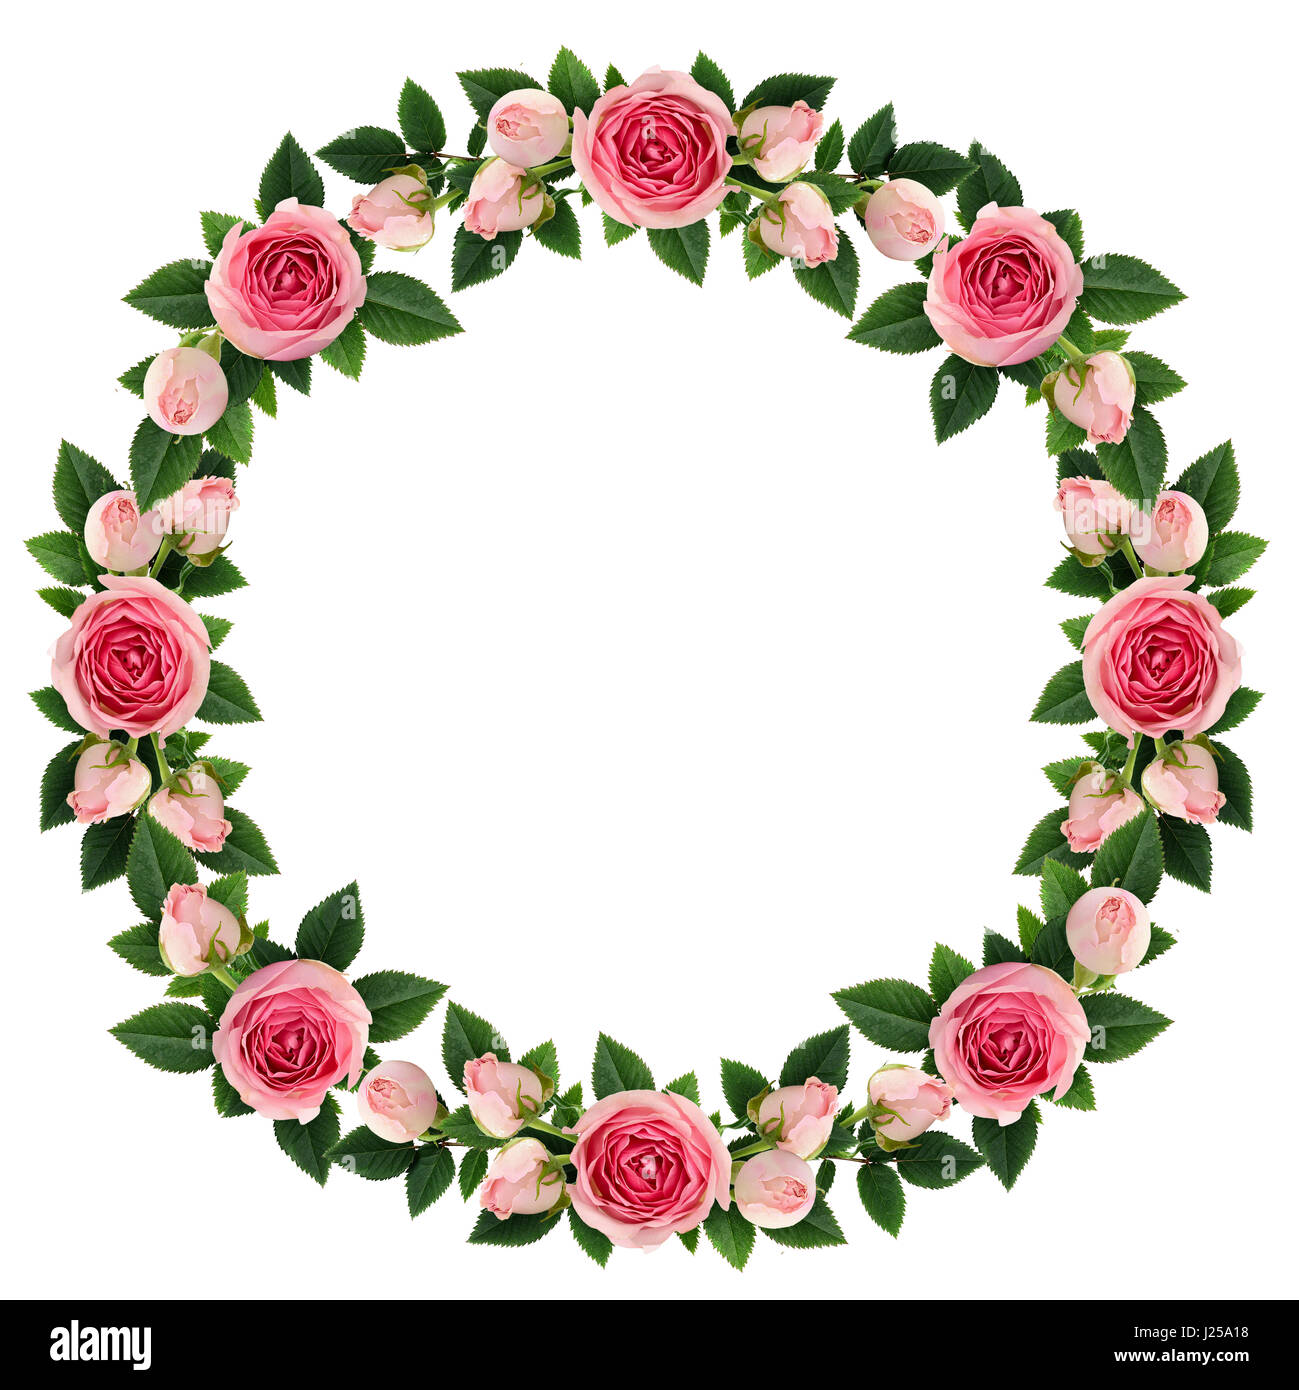 Pink rose flowers round frame isolated on white. Flat lay. Top view. Stock Photo